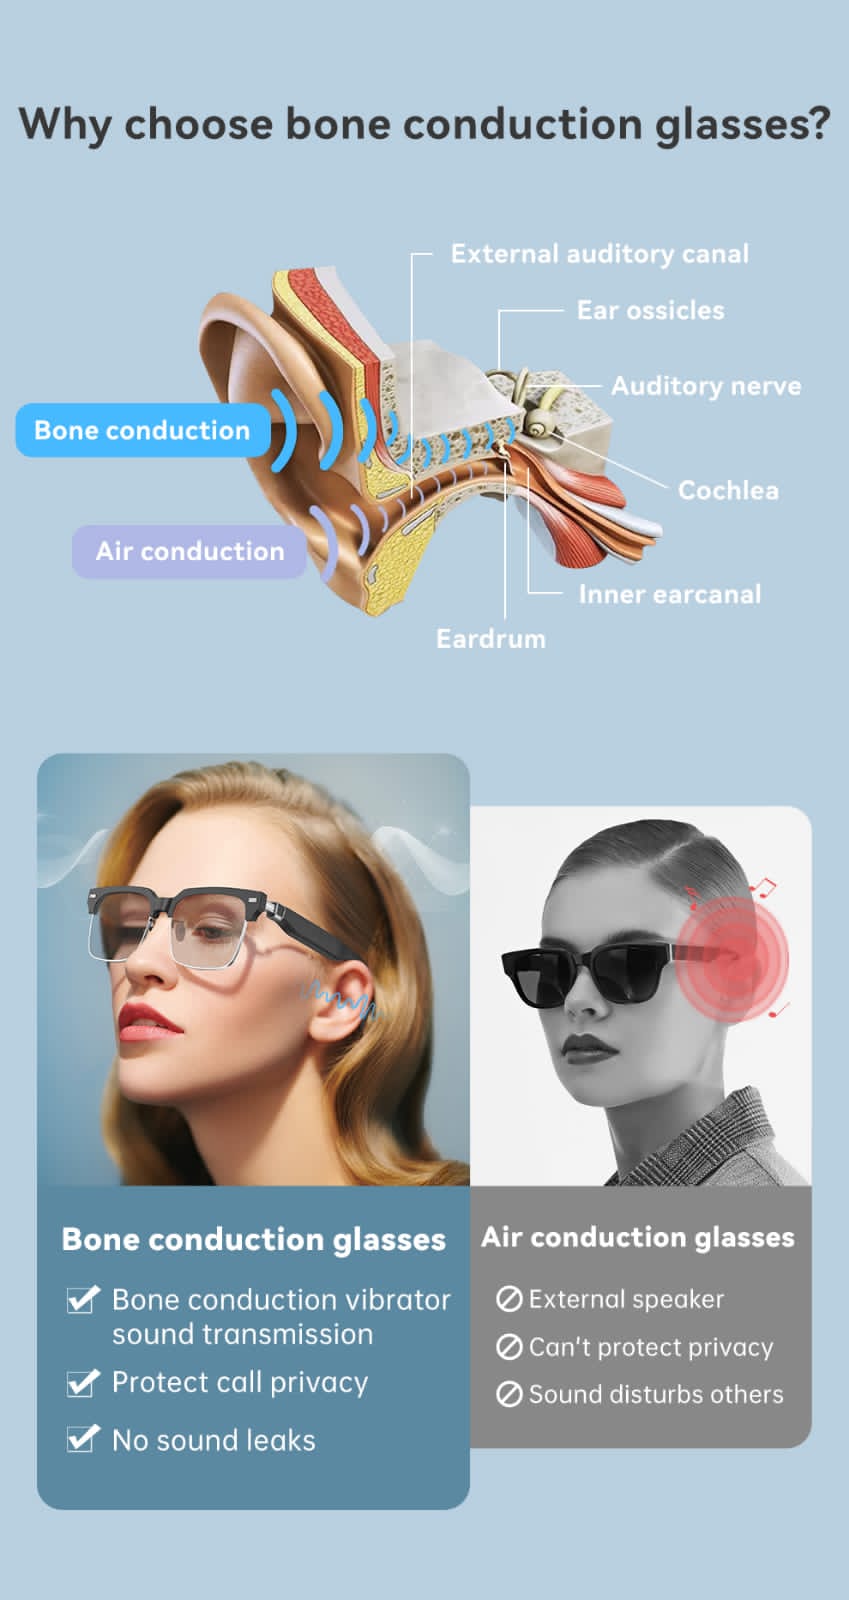 YES! IT'S HEARING AIDS SYSTEM, 4 functions in One system solution, eEAR-BT System: Hearing Aids rechargeable CIC, Optical / prescription , Bluetooth Bone Conduction audio/sound glasses, Bluetooth (BT) Transmitter (Tx) / Recover (Rx)